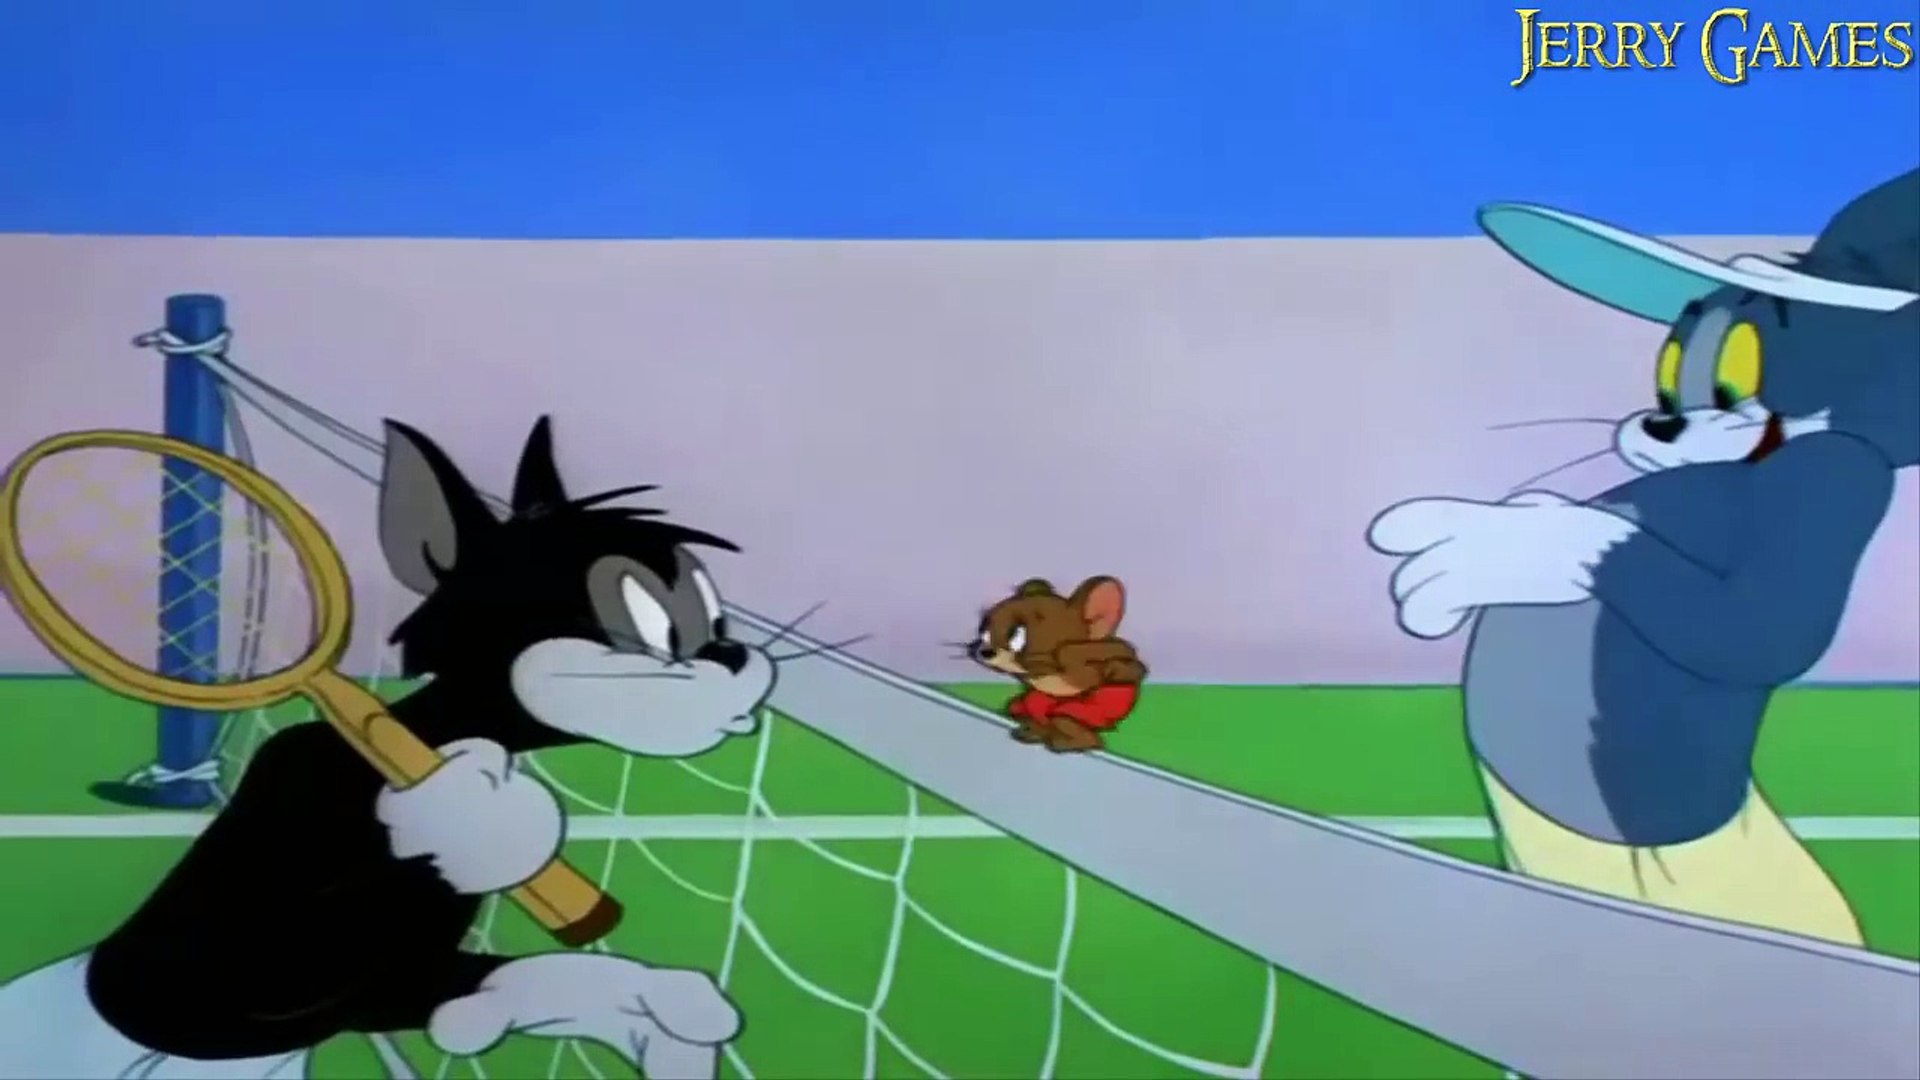 Tom and Jerry Full Episodes | Tennis Chumps (1949) Part 2/2 - (Jerry Games)  - video Dailymotion